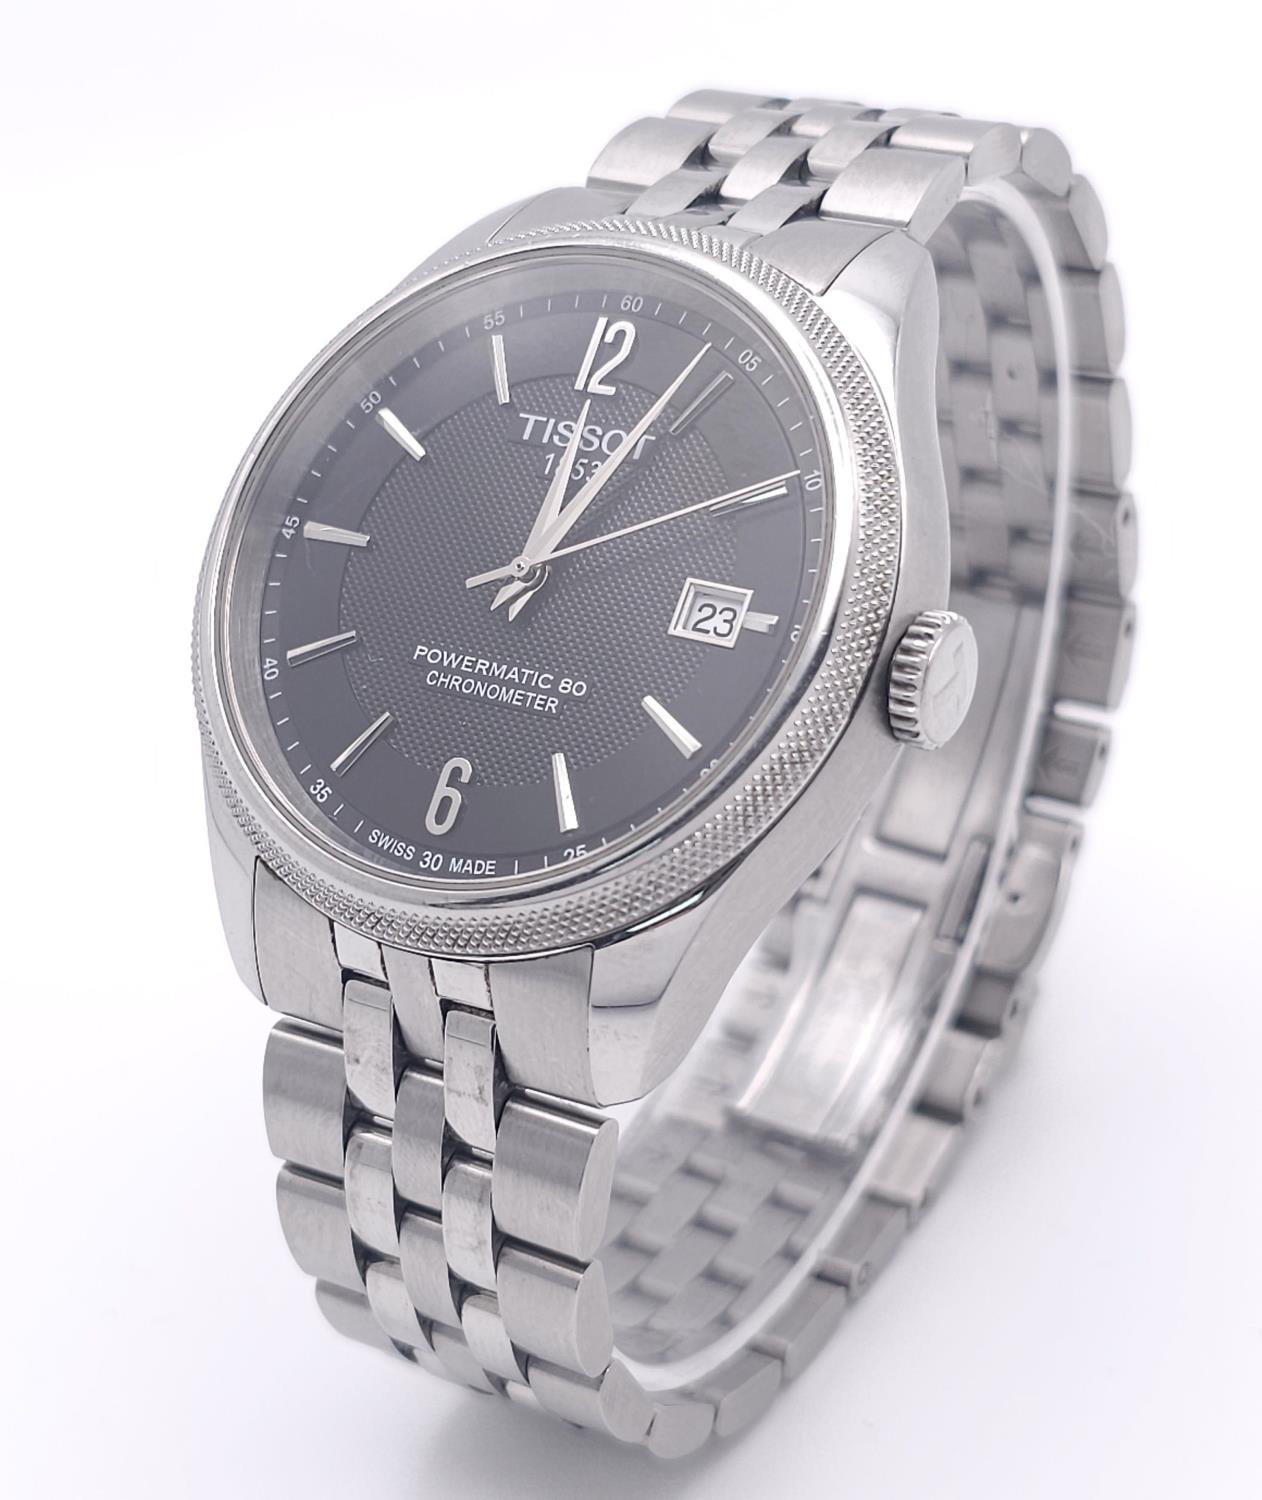 A Tissot Powermatic 80 Gents Watch. Stainless steel bracelet and case - 41mm. Black dial with date - Image 22 of 28